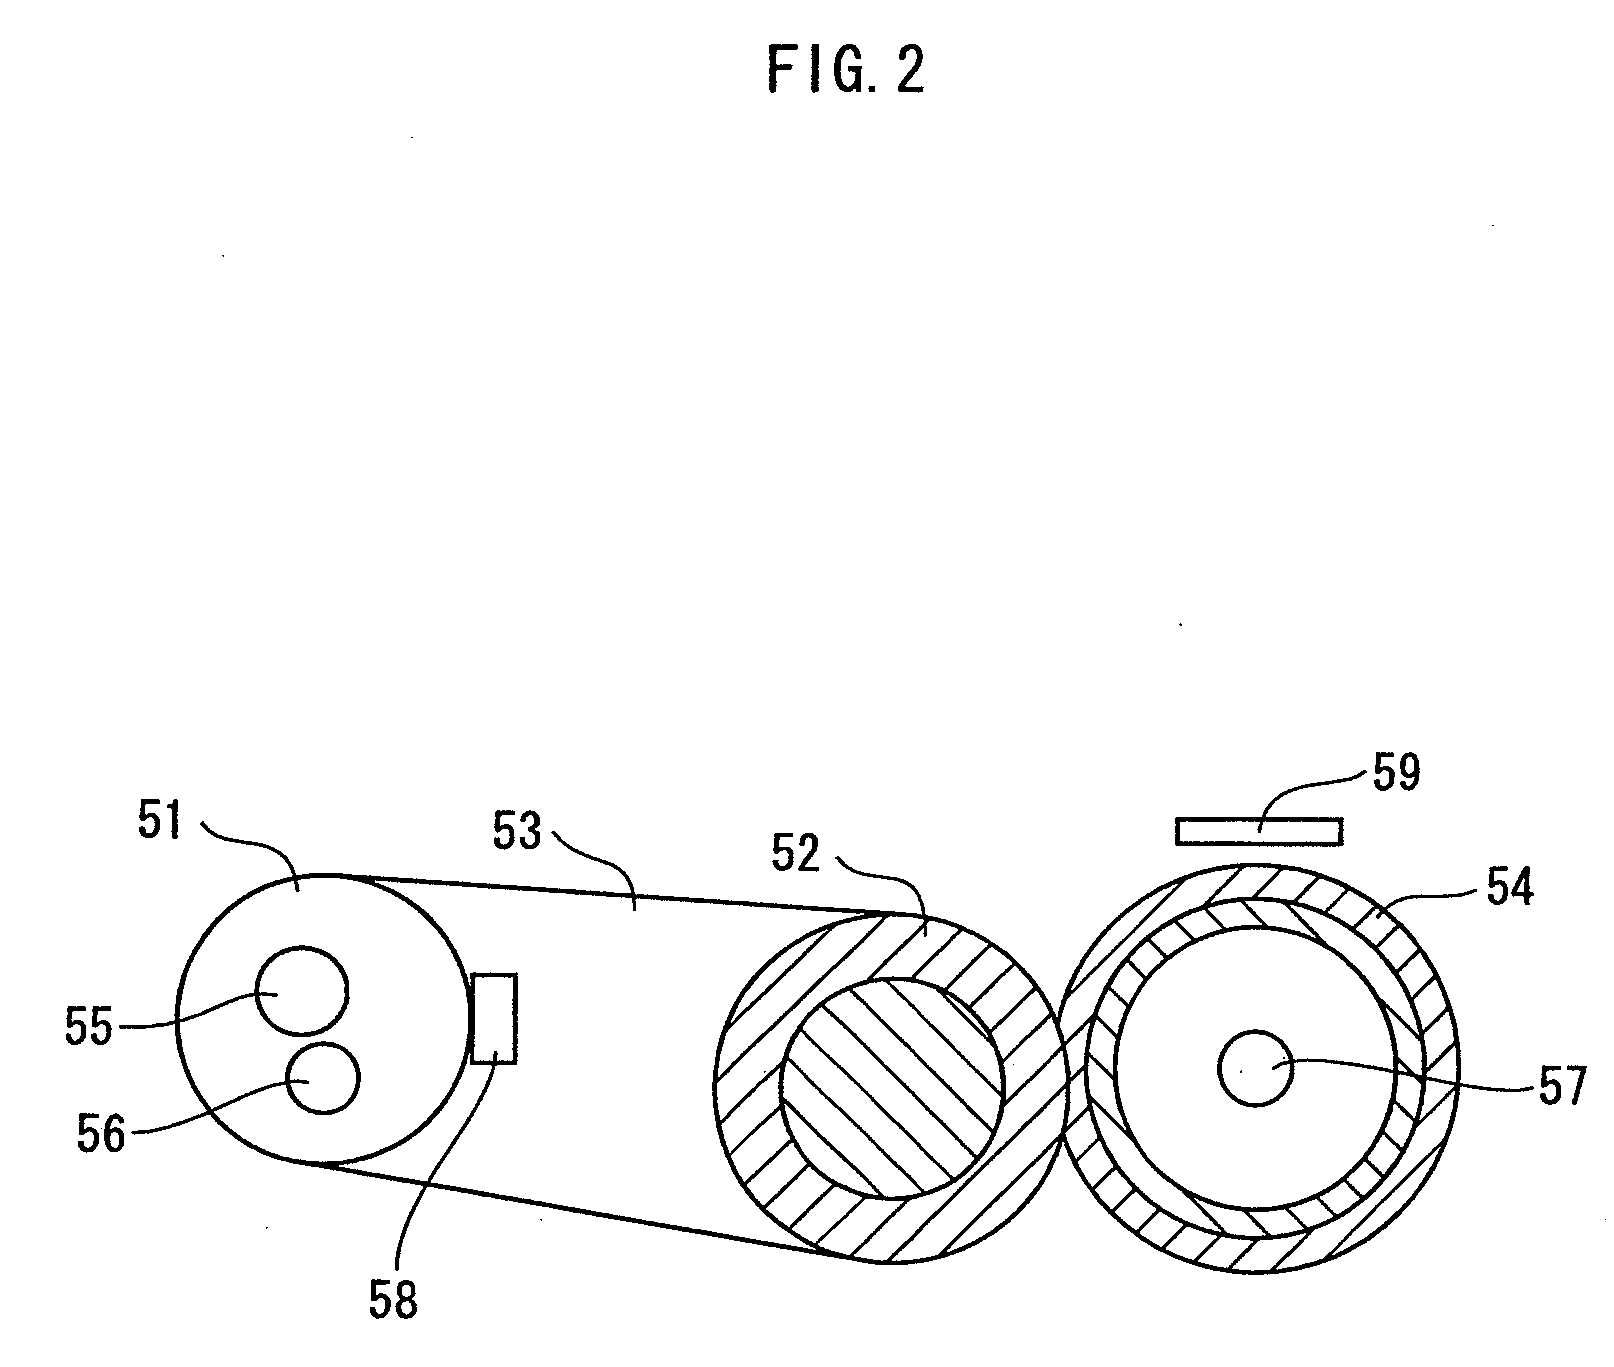 Image formation apparatus and image formation method